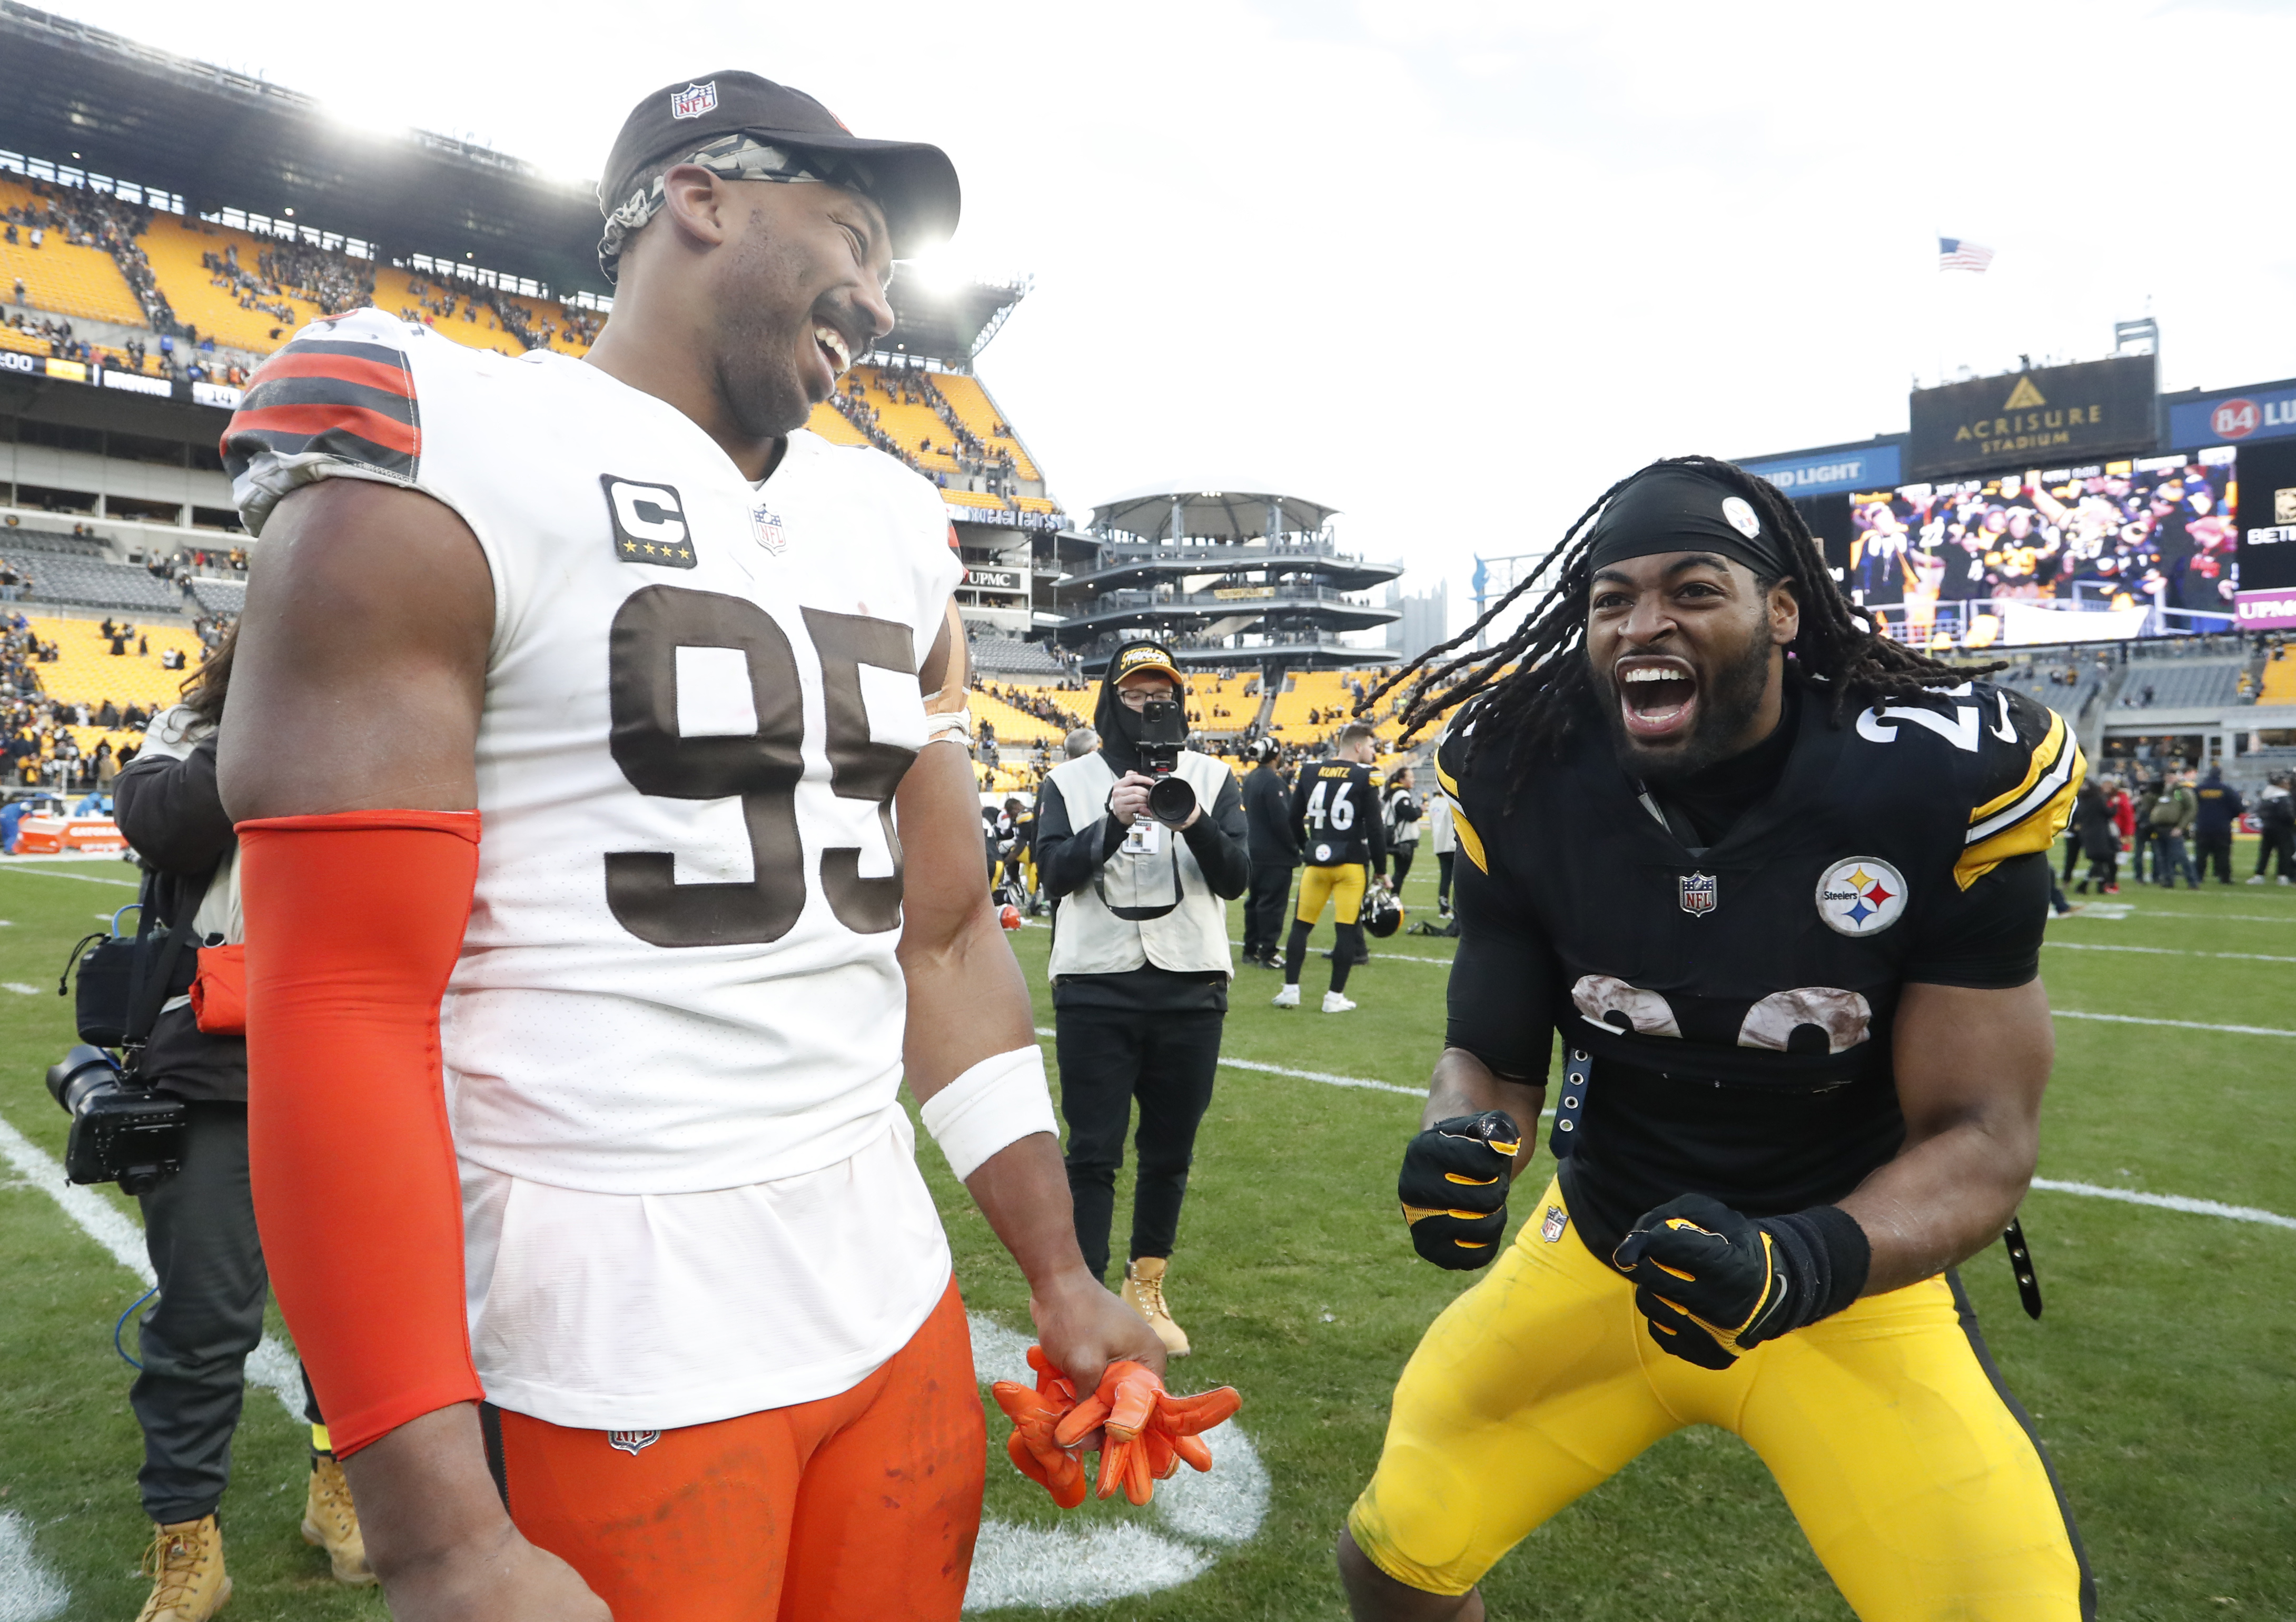 NFL: Cleveland Browns at Pittsburgh Steelers